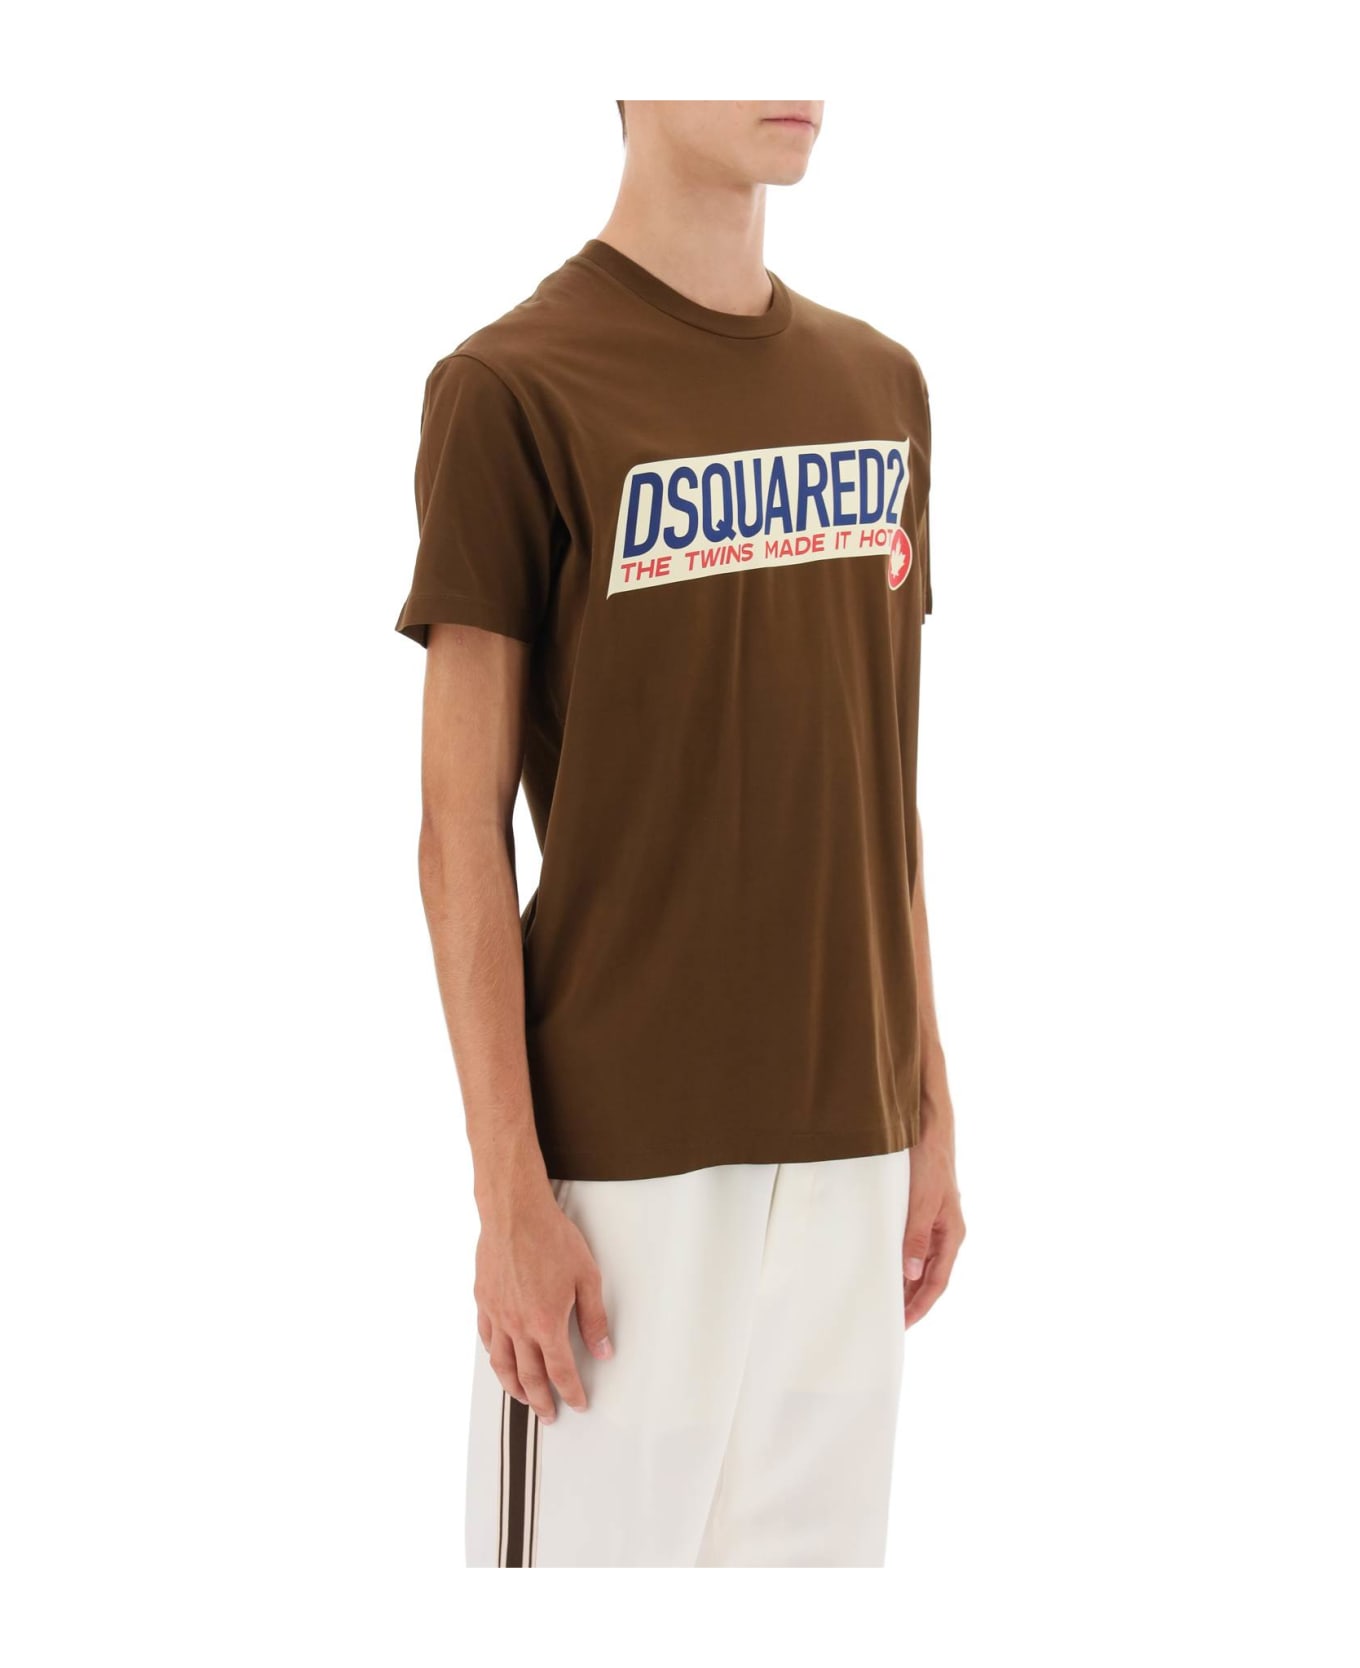 Dsquared2 Cool Fit Printed Tee - BROWN